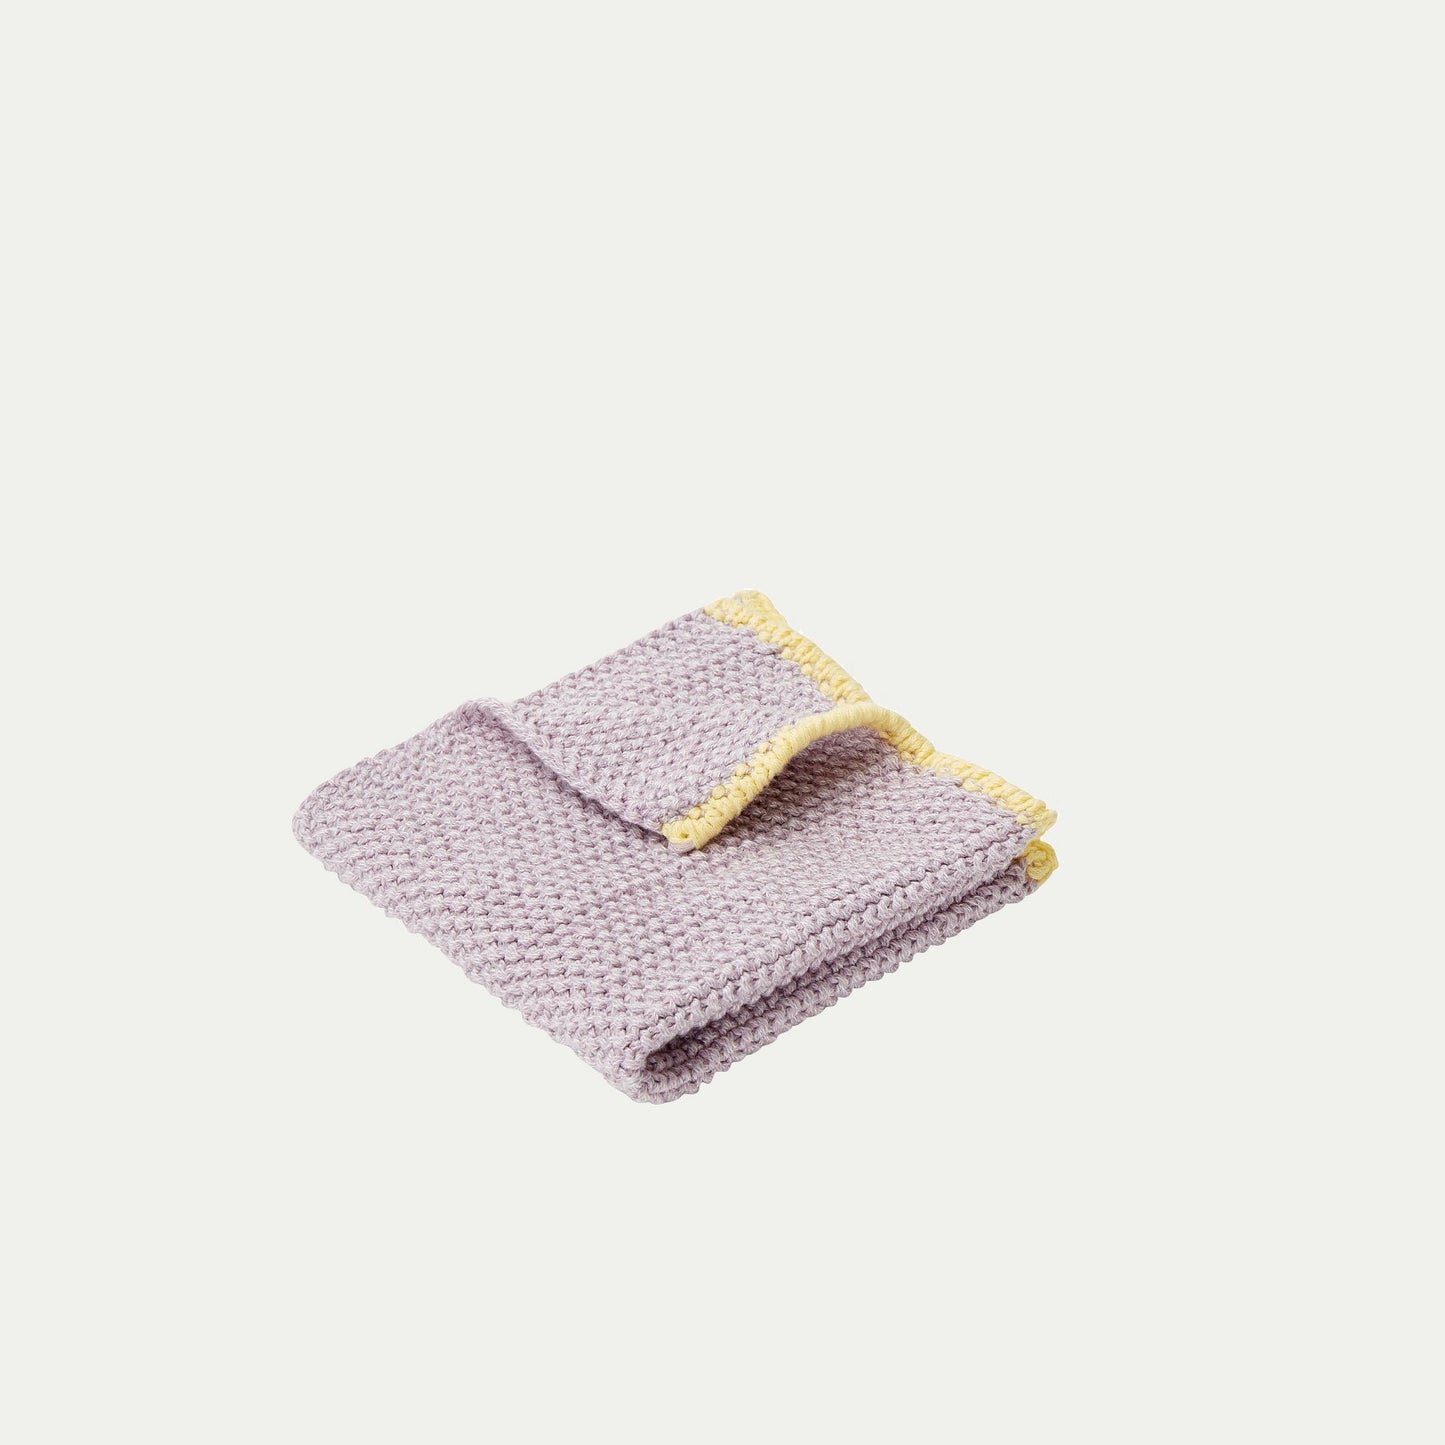 Hubsch Interior Scandi designer dish cloth in lilac purple and yellow cotton knit on a white background